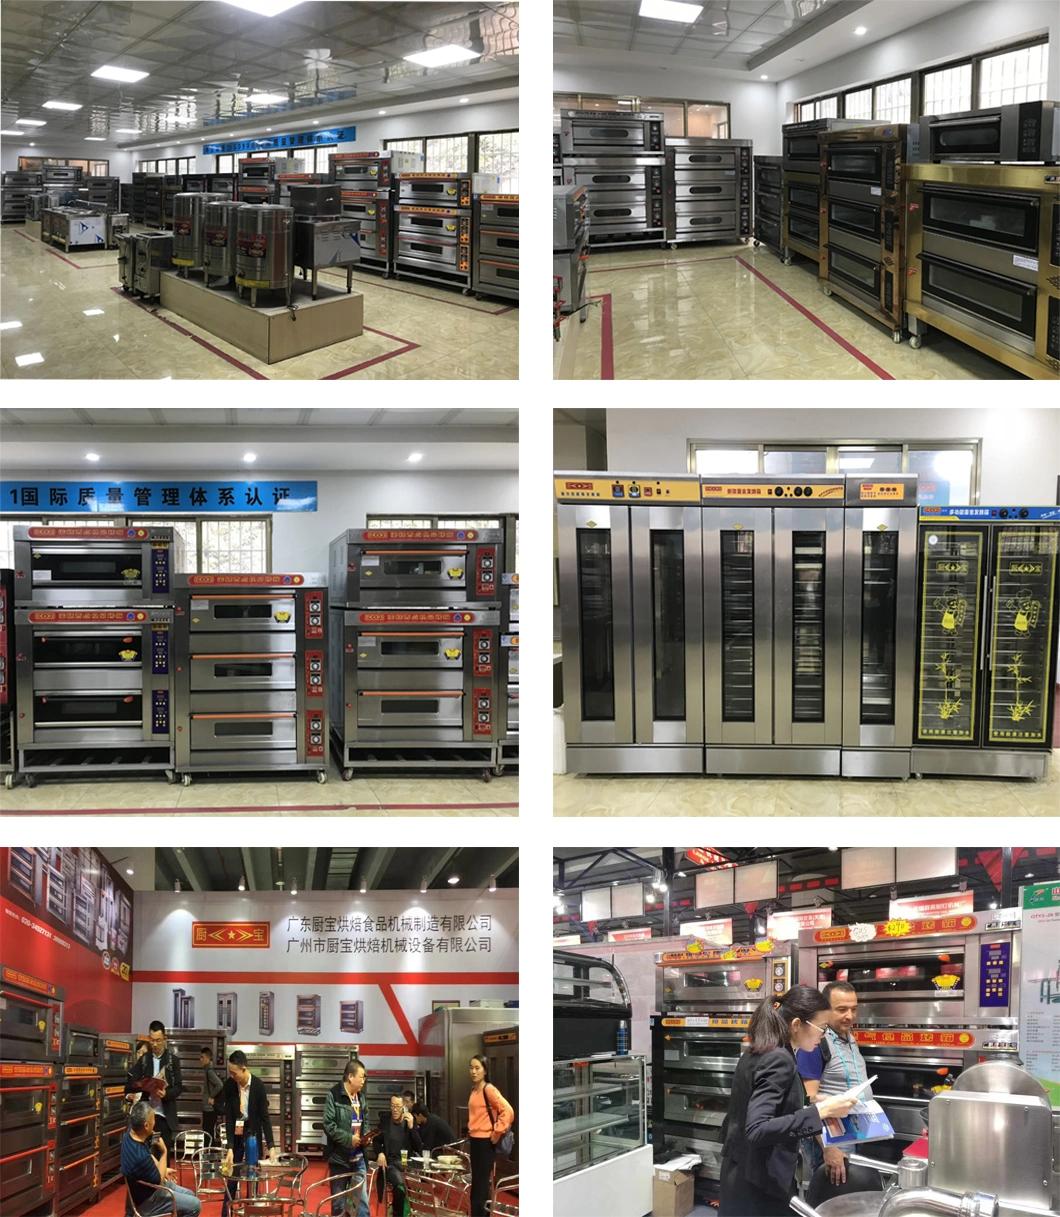 Commercial Restaurant Kitchen 1 Deck 2 Trays Electric Oven for Baking Equipment Food Machinery Bakery Machine Oven